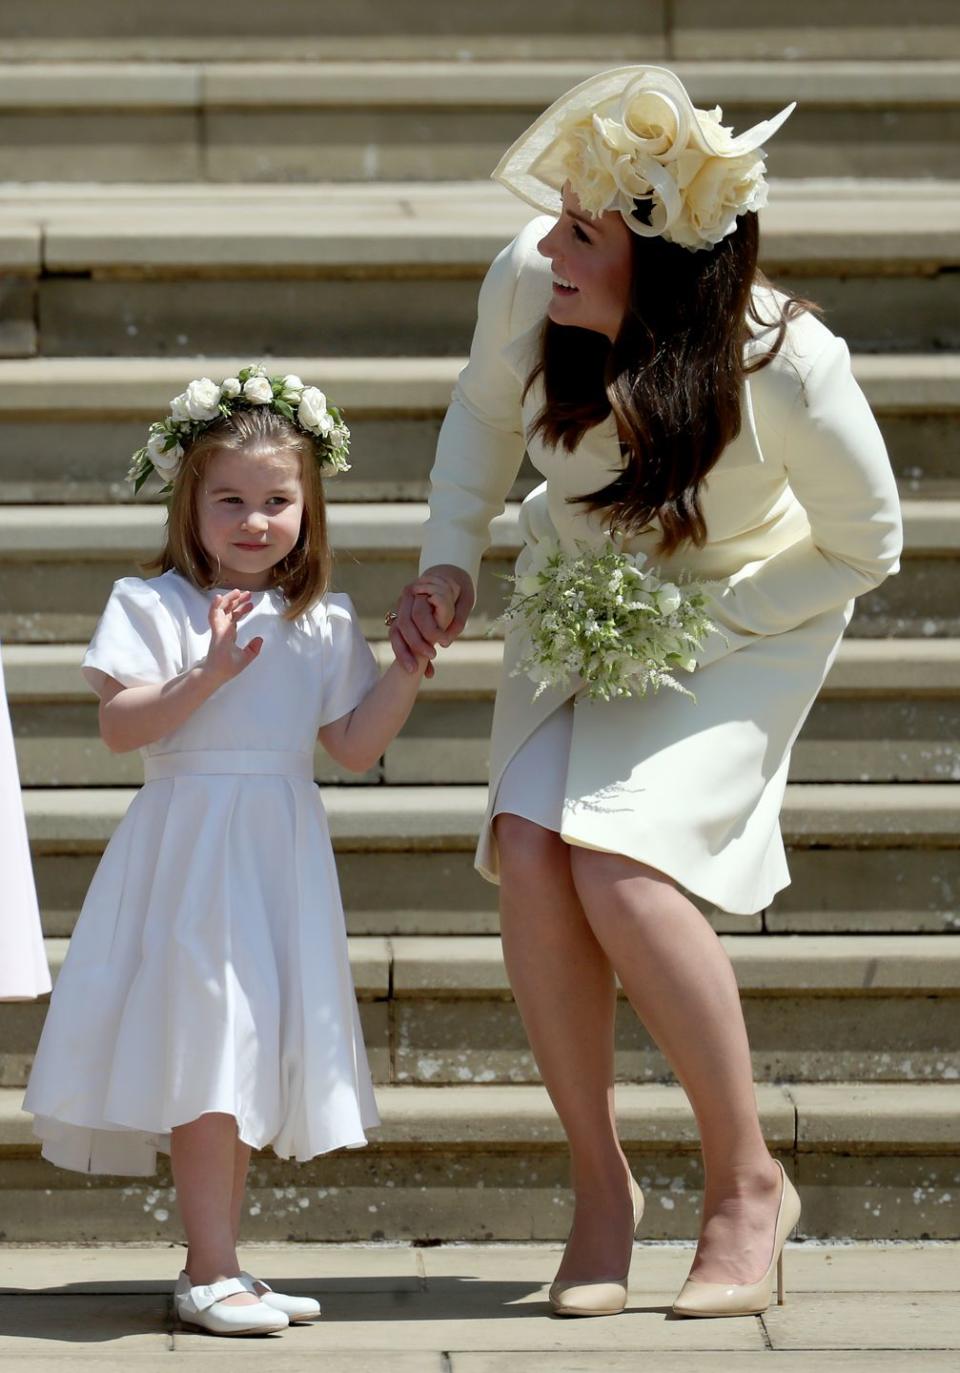 windsor, united kingdom may 19 princess charlotte of cambridge stands on the steps with her mother catherine, duchess of cambridge after the wedding of prince harry and ms meghan markle at st georges chapel at windsor castle on may 19, 2018 in windsor, england photo by jane barlow wpa poolgetty images